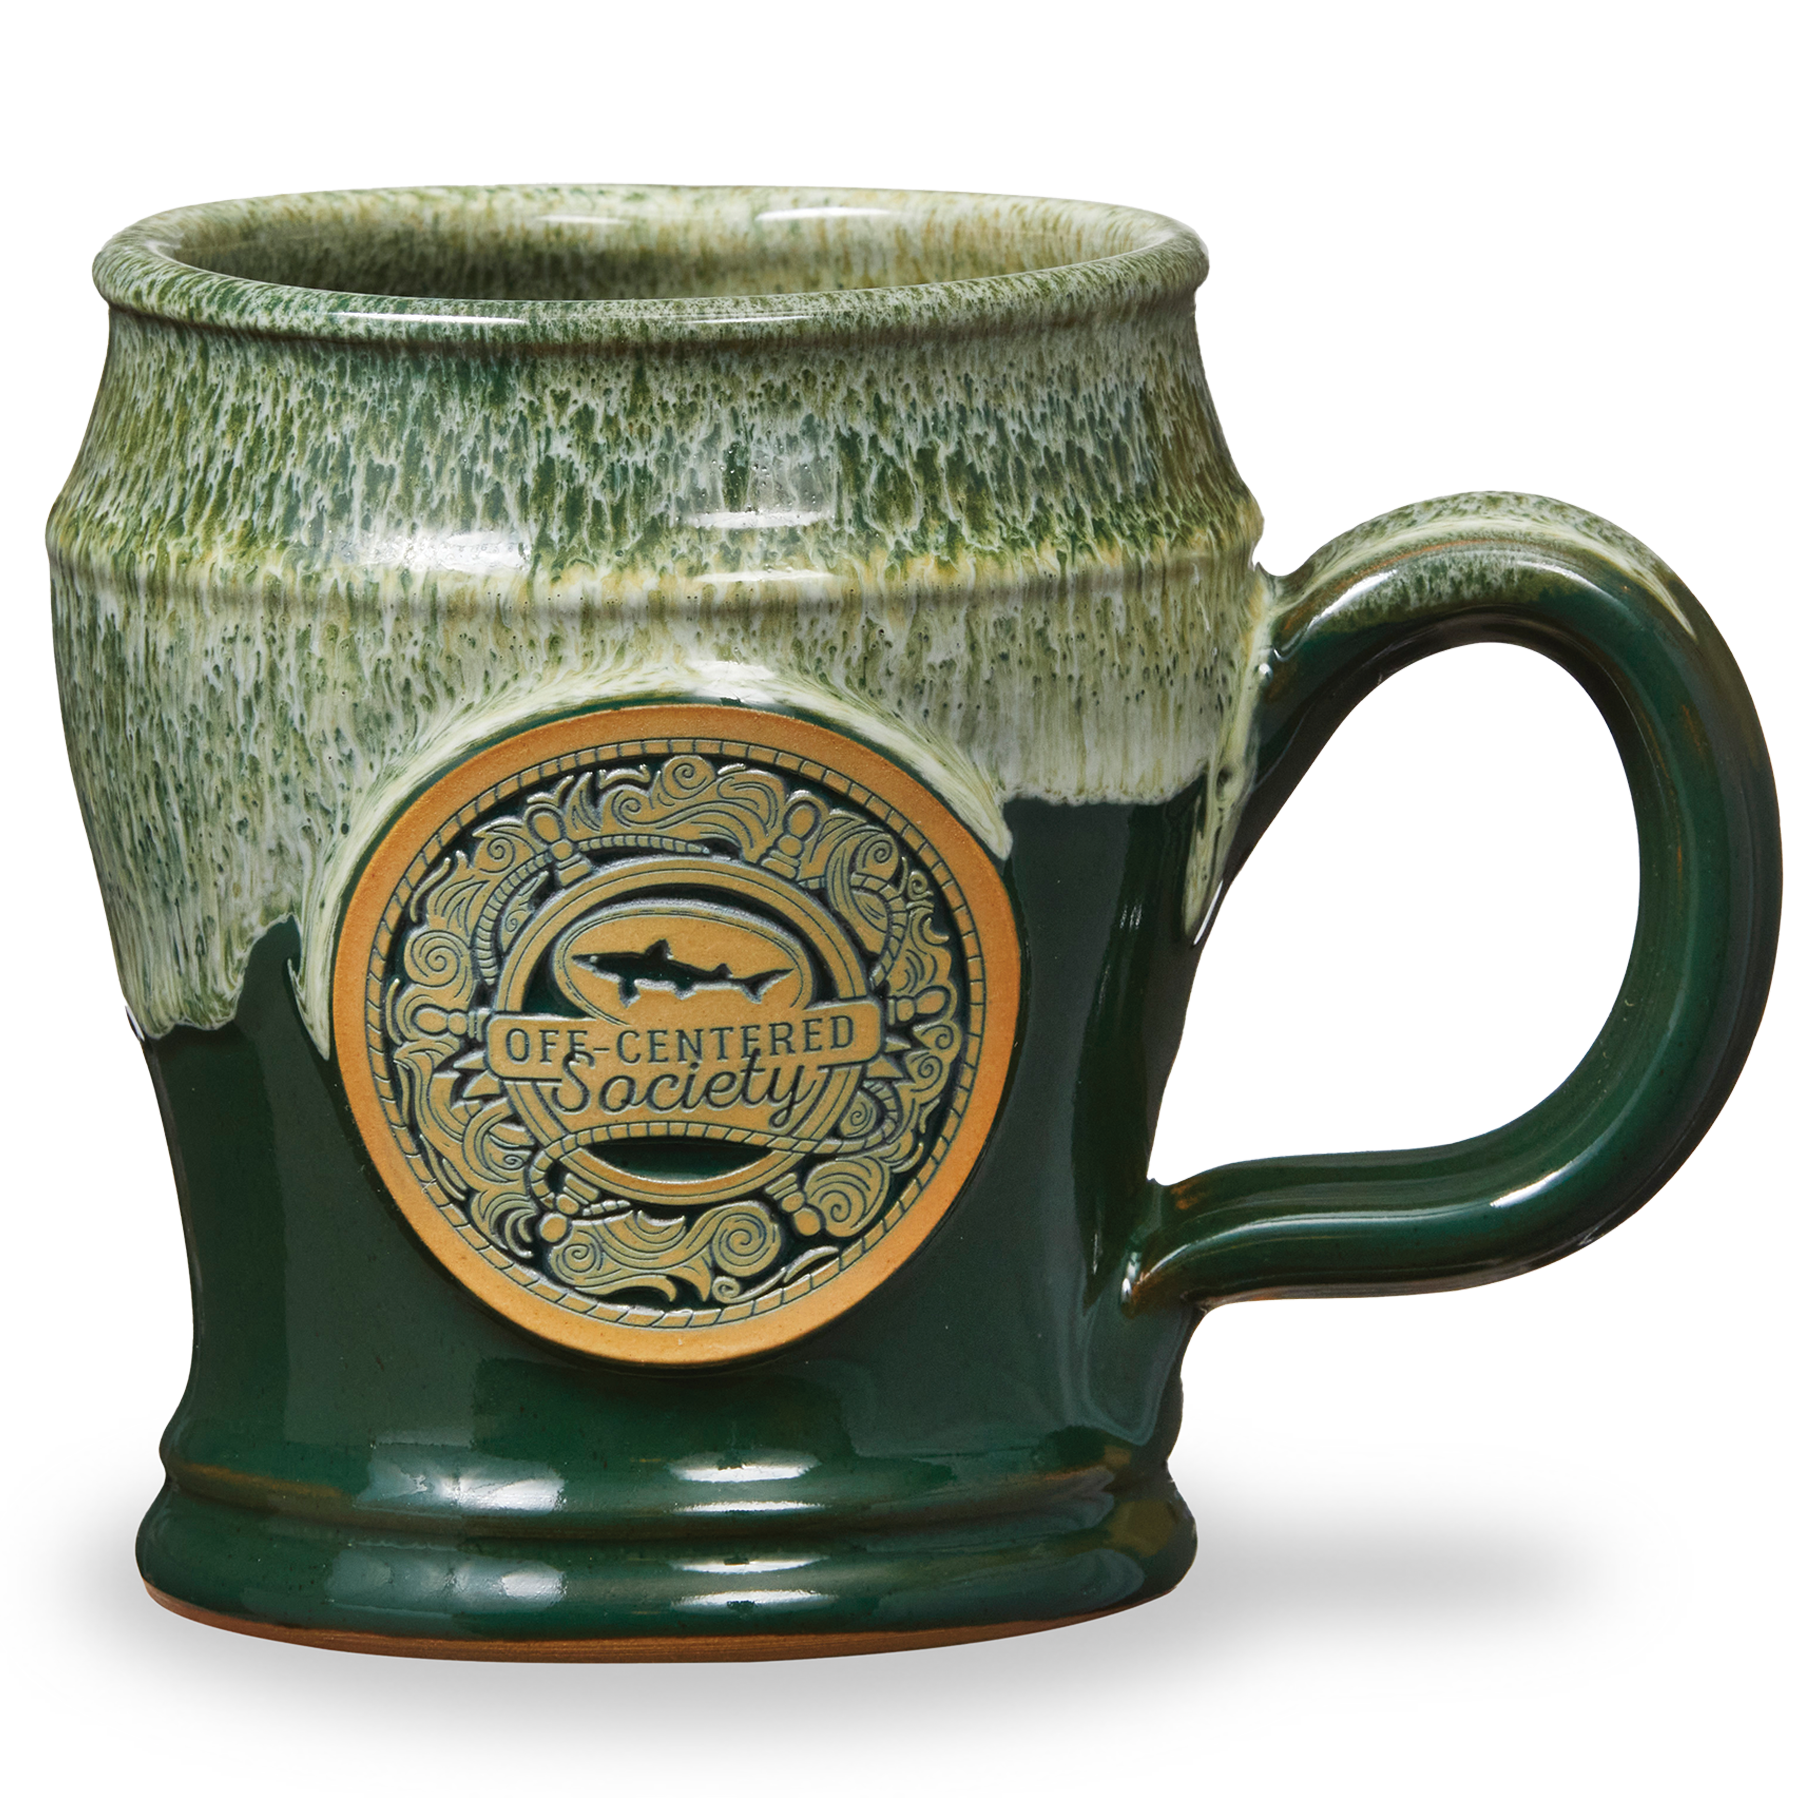 Dogfish Head Brewery <a class='qbutton' href='https://deneenpottery.com/mug-styles/amp/'>View More Details</a>